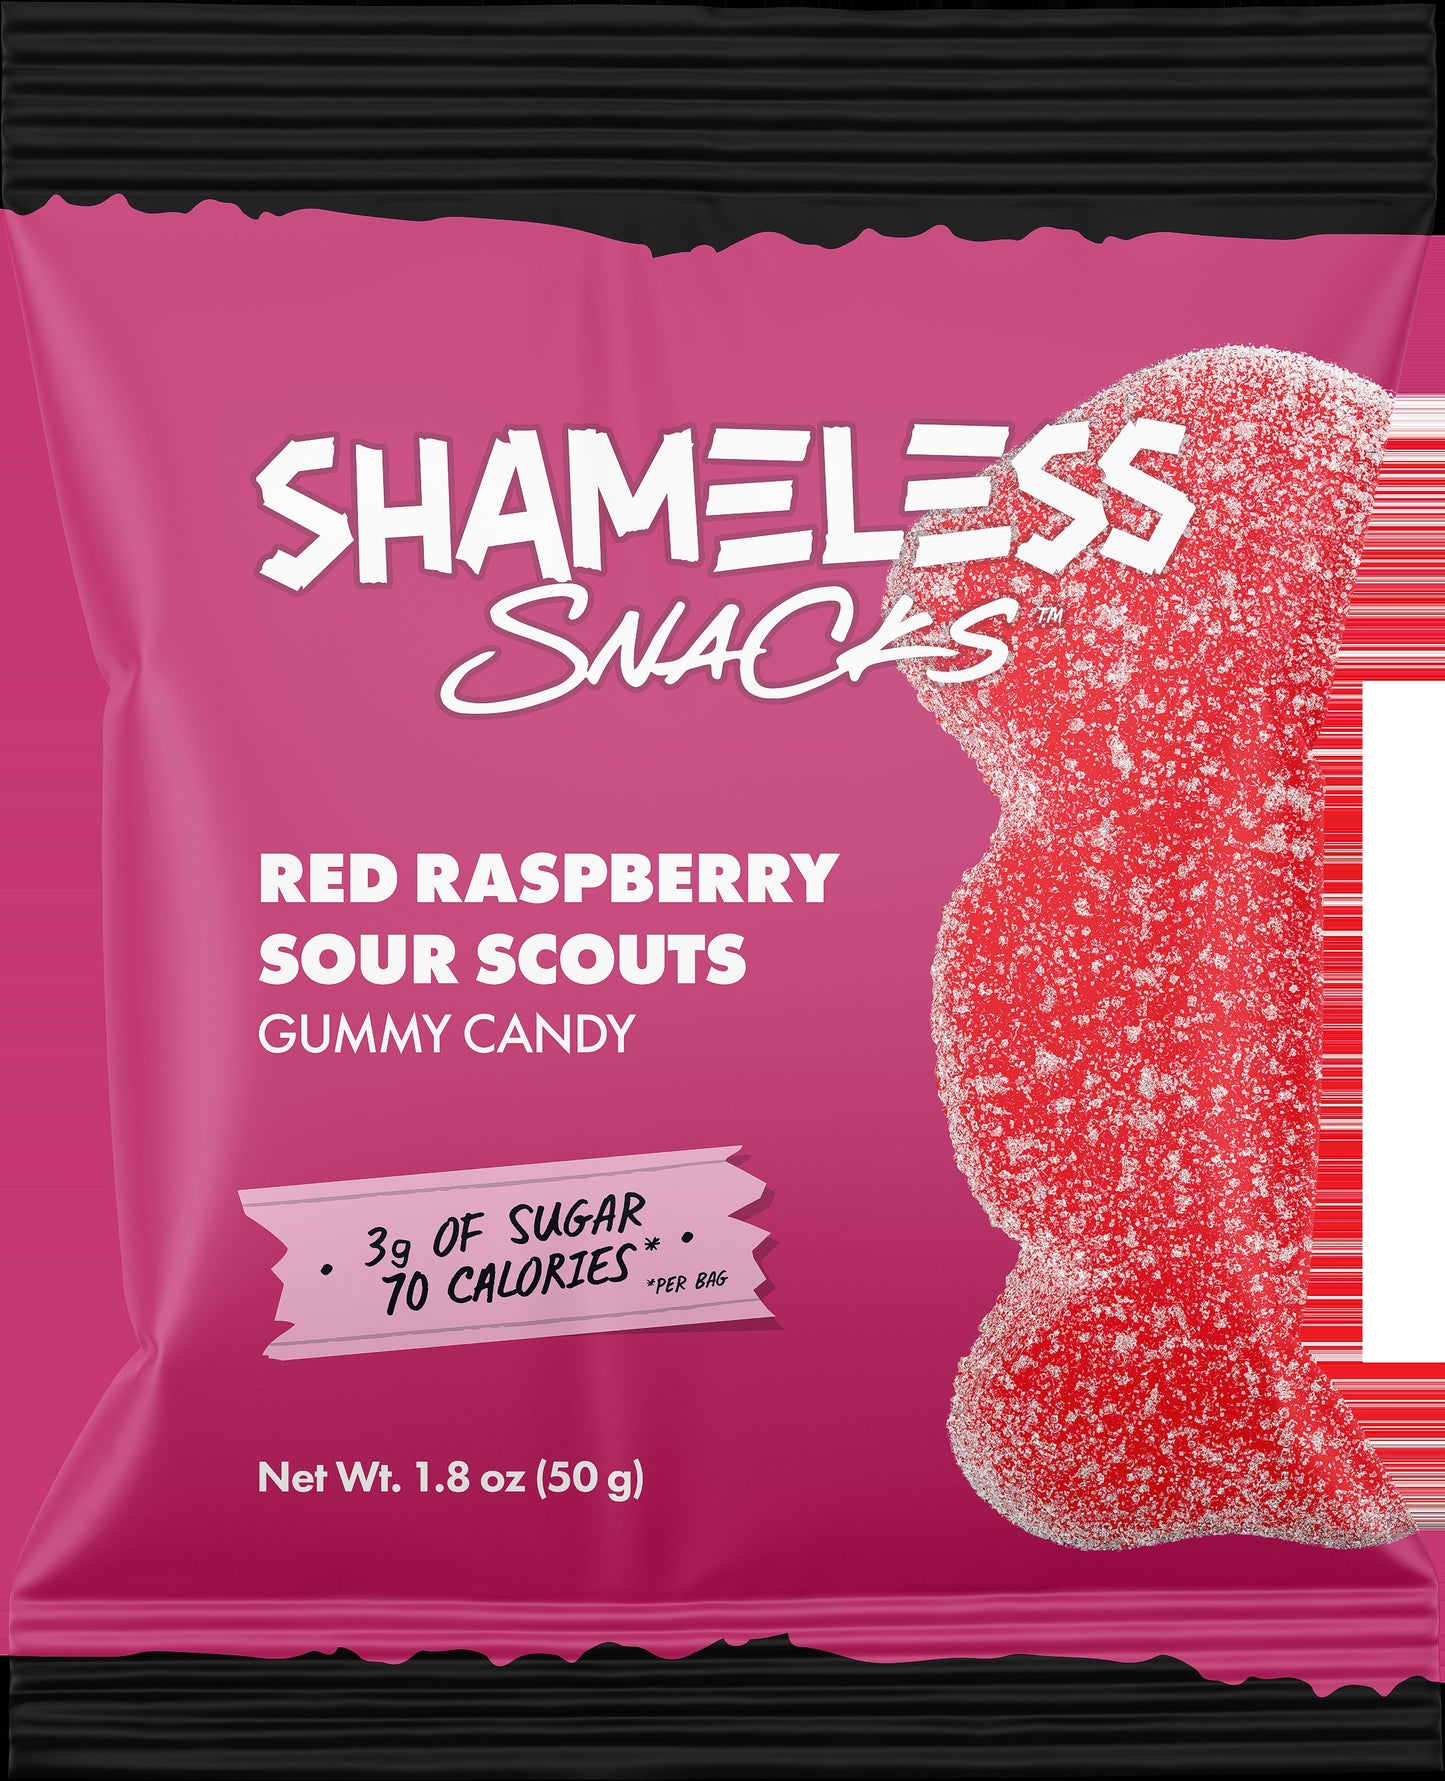 Shameless Snacks Gummy Candy 6box Red Raspberry Sour Scouts.